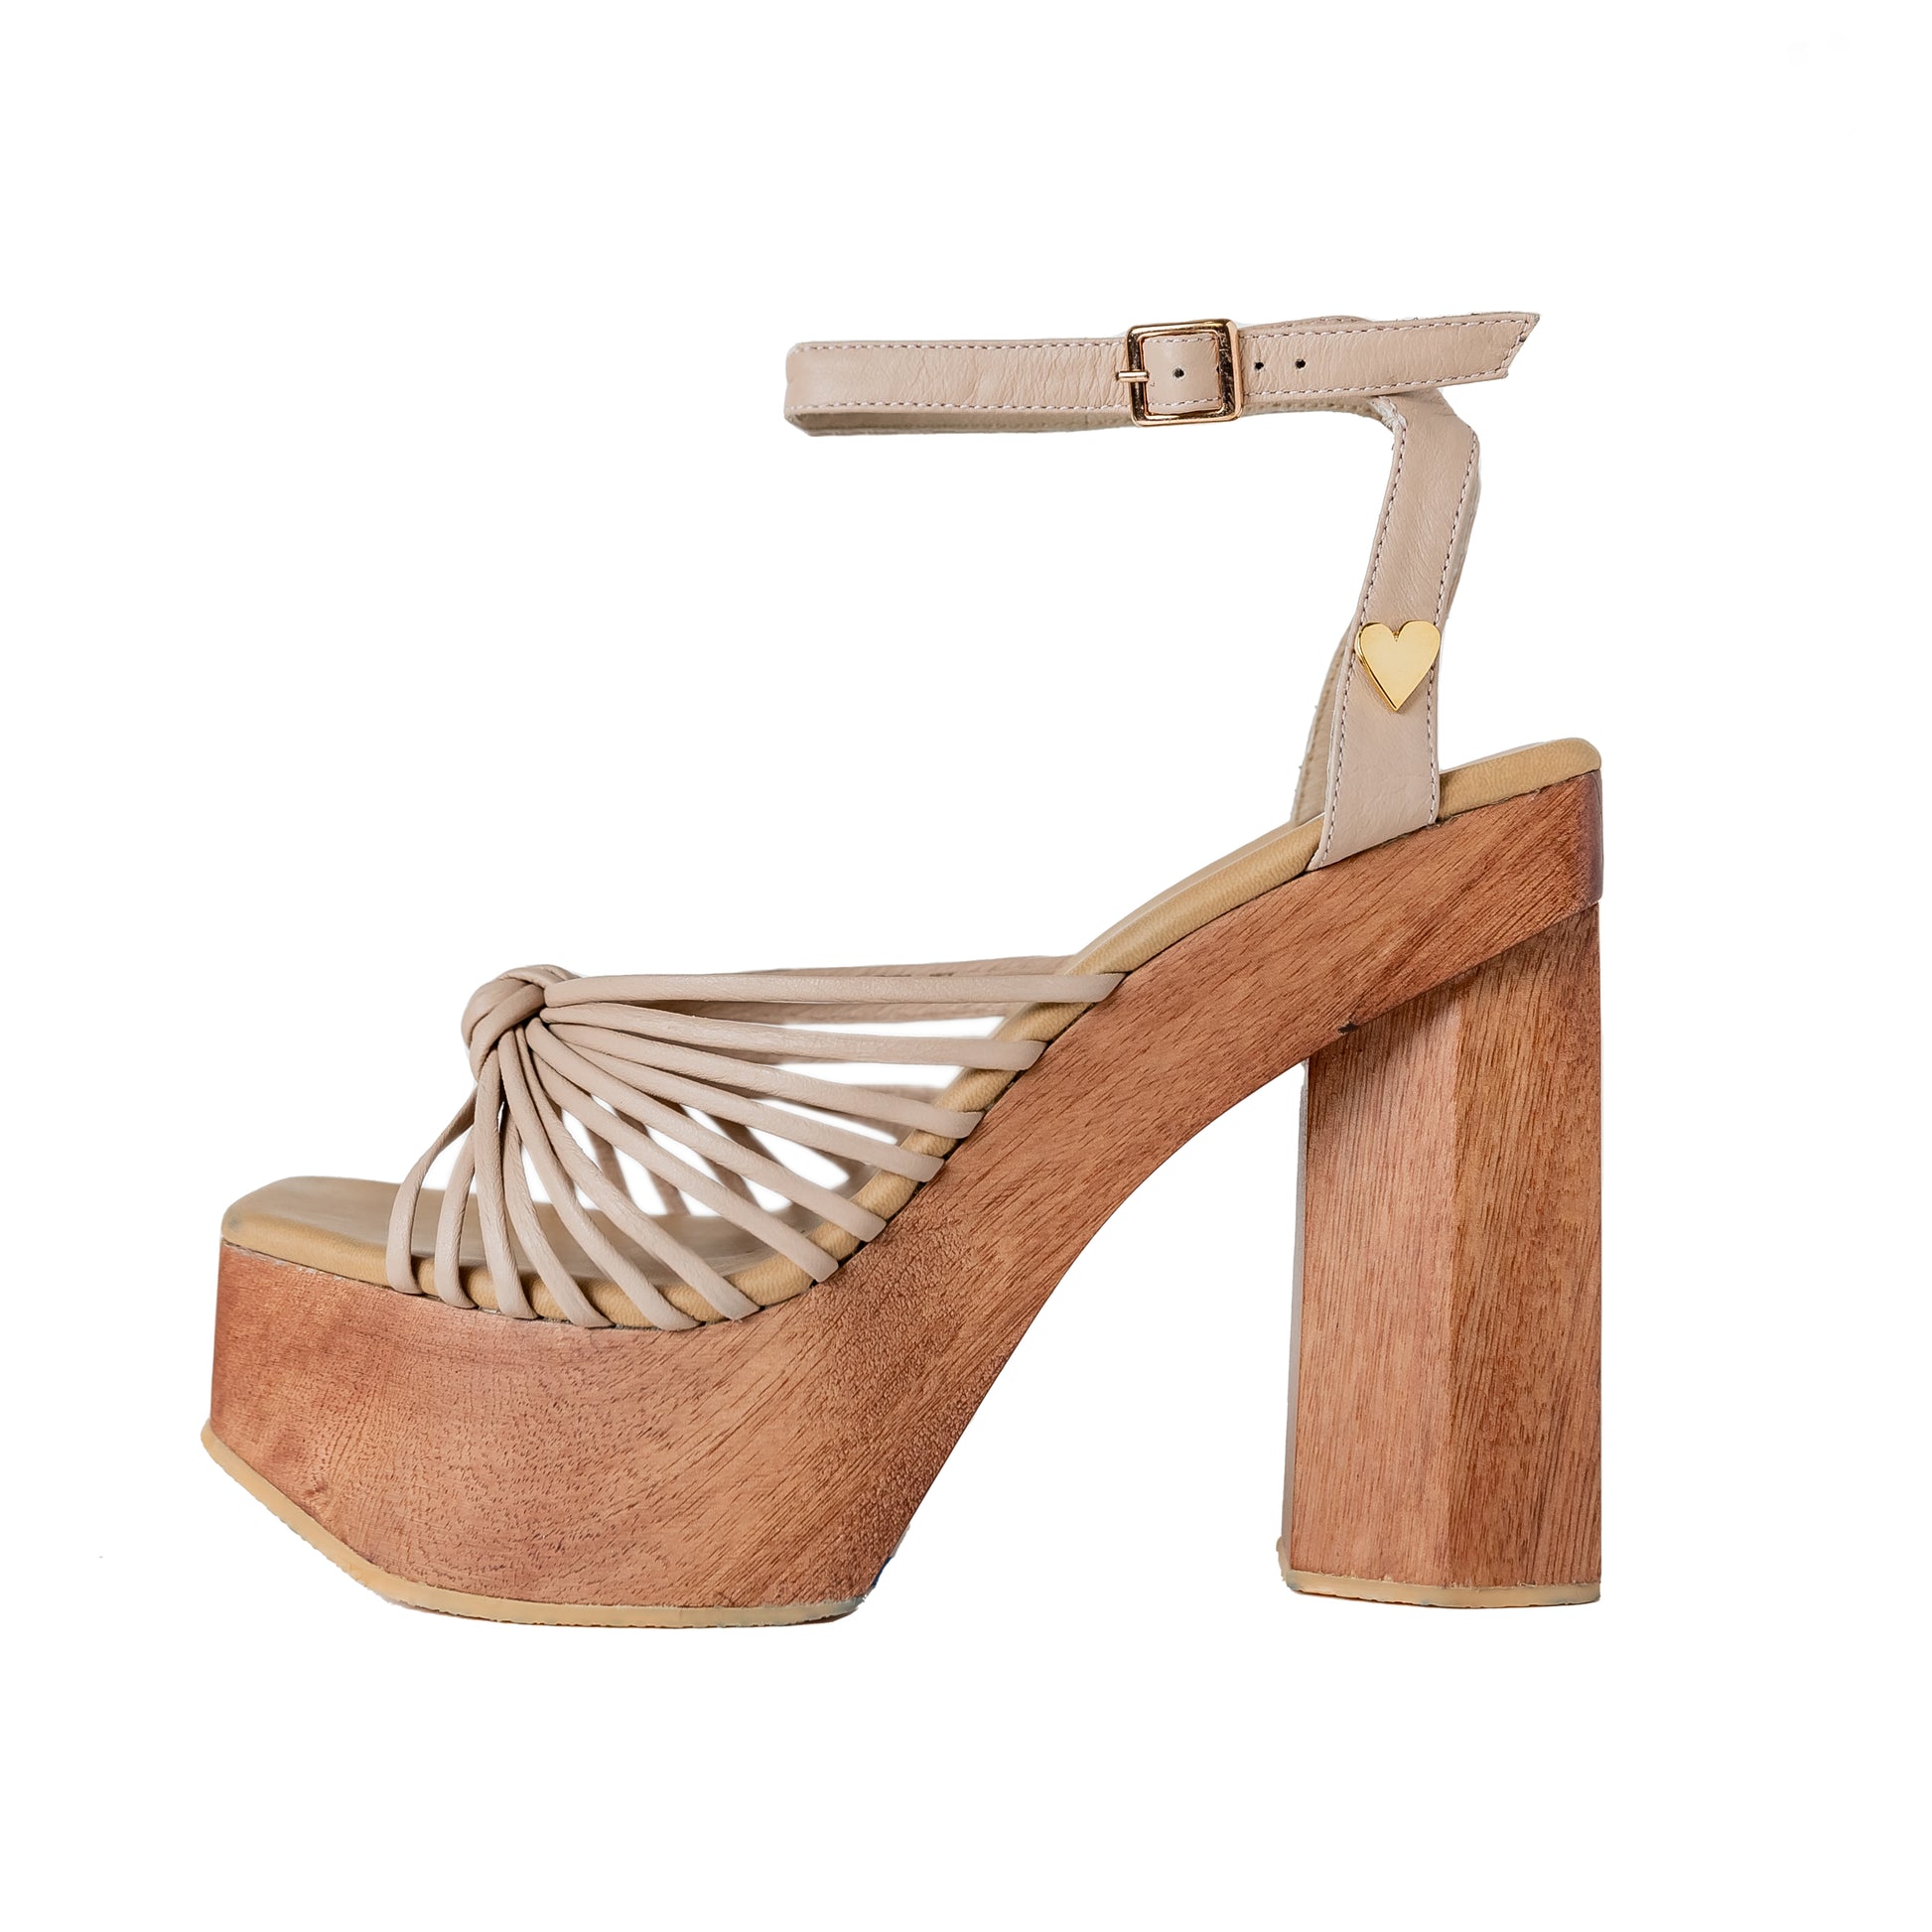 Sandal Stella by Nataly Mendez. Its upper material, lining, and insole are made of genuine leather. Its 5-inch heel height and 1.75-inch platform.